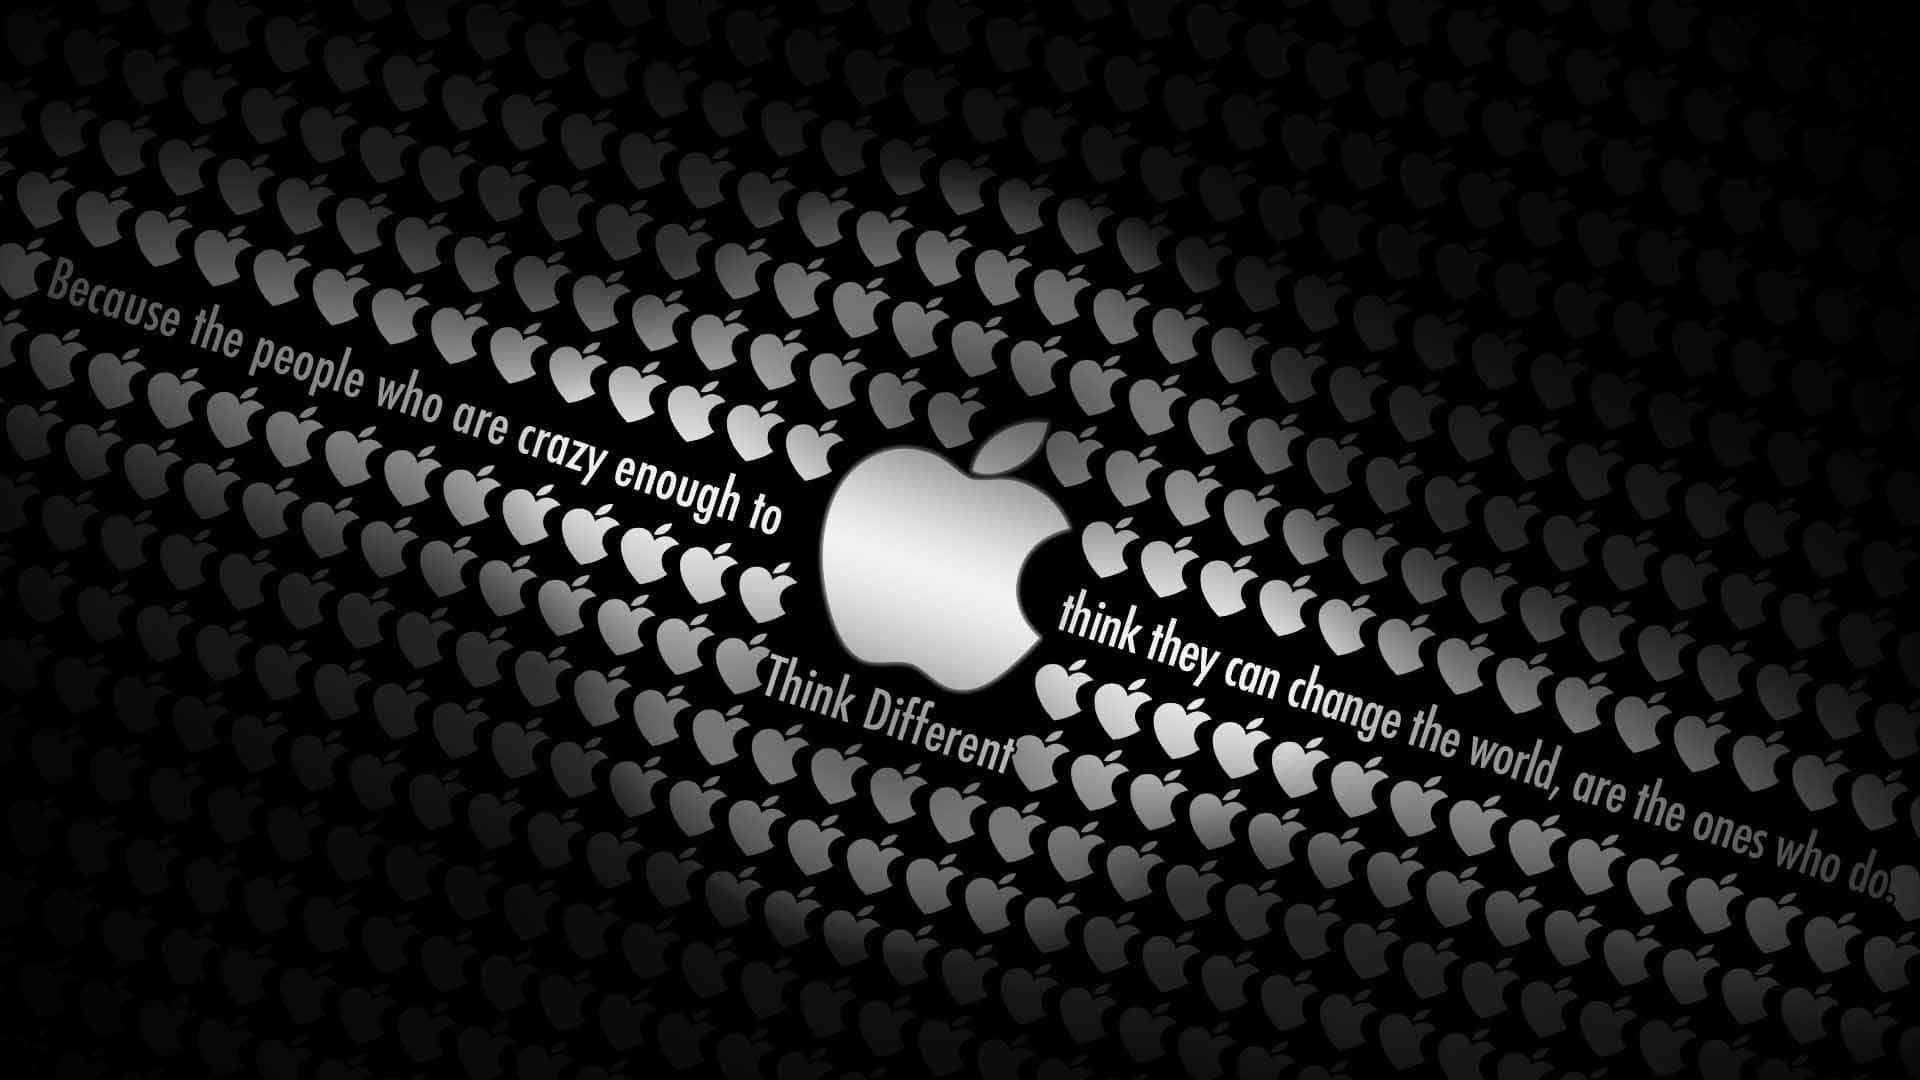 Cool Mac Logo Inspirational Quote Background